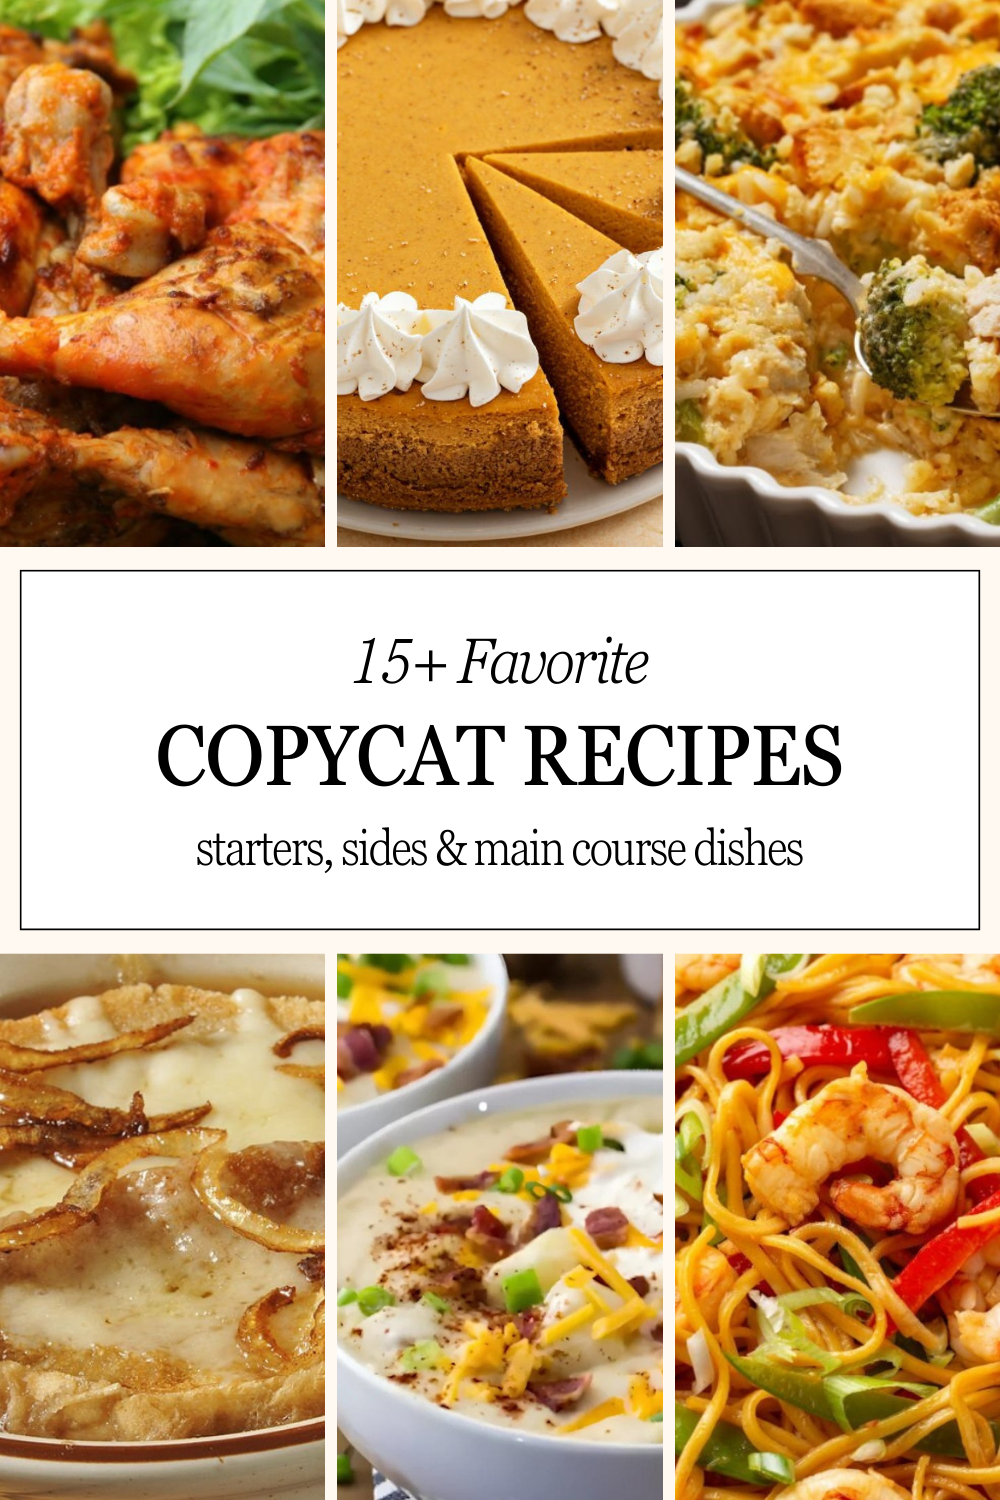 15+ Favorite Copycat Recipes to Try at home